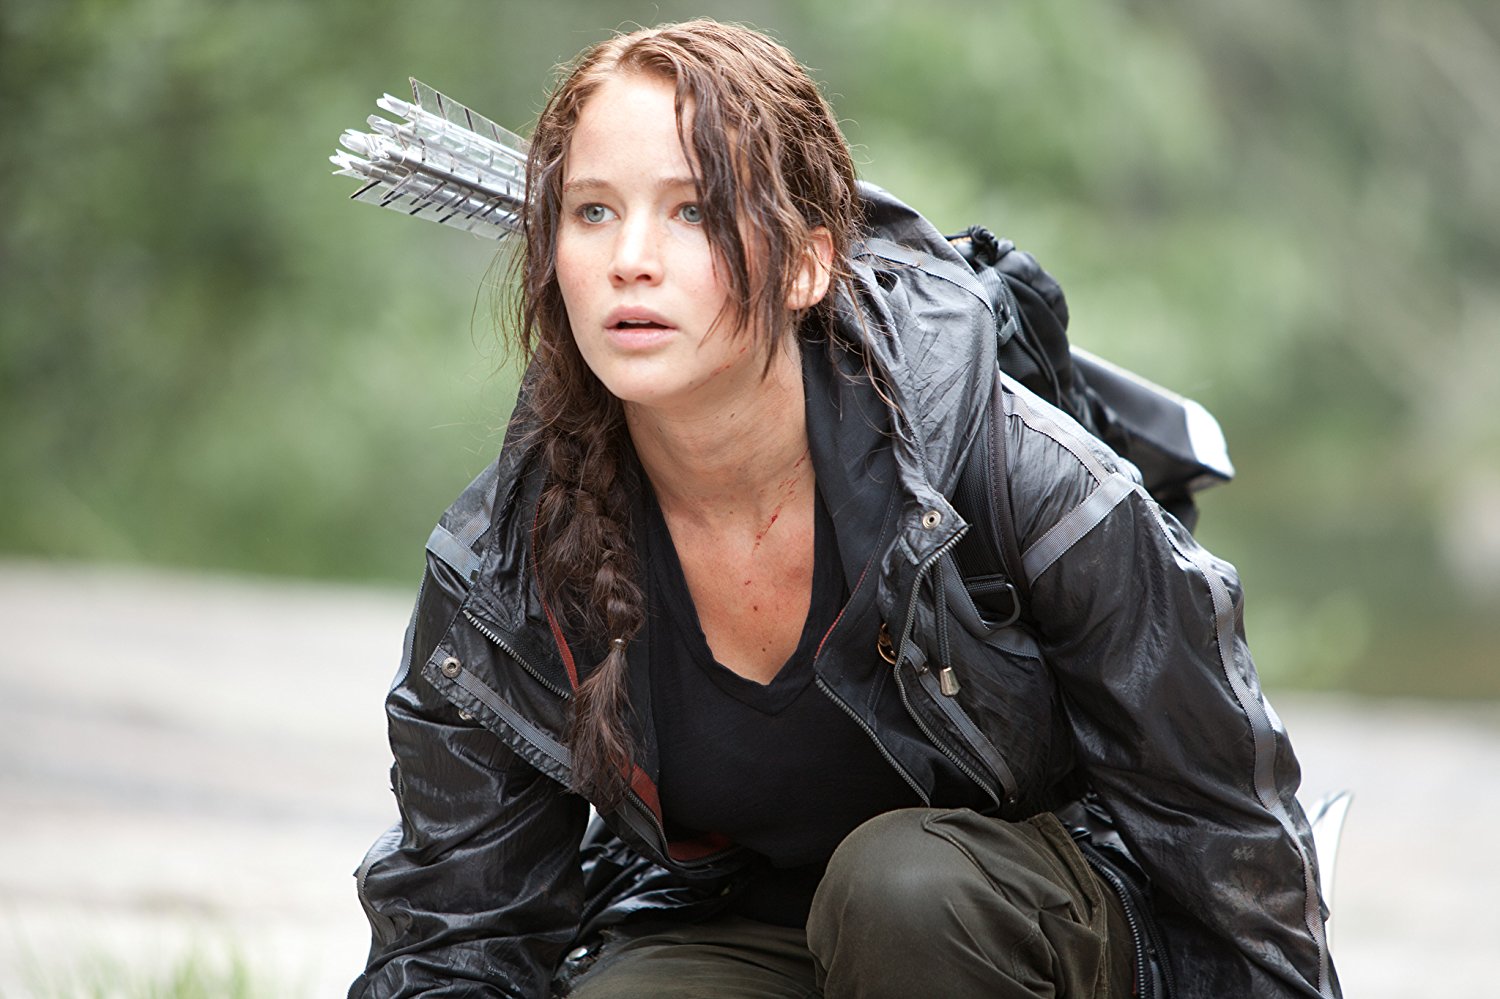 PHOTO: Jennifer Lawrence in "The Hunger Games."